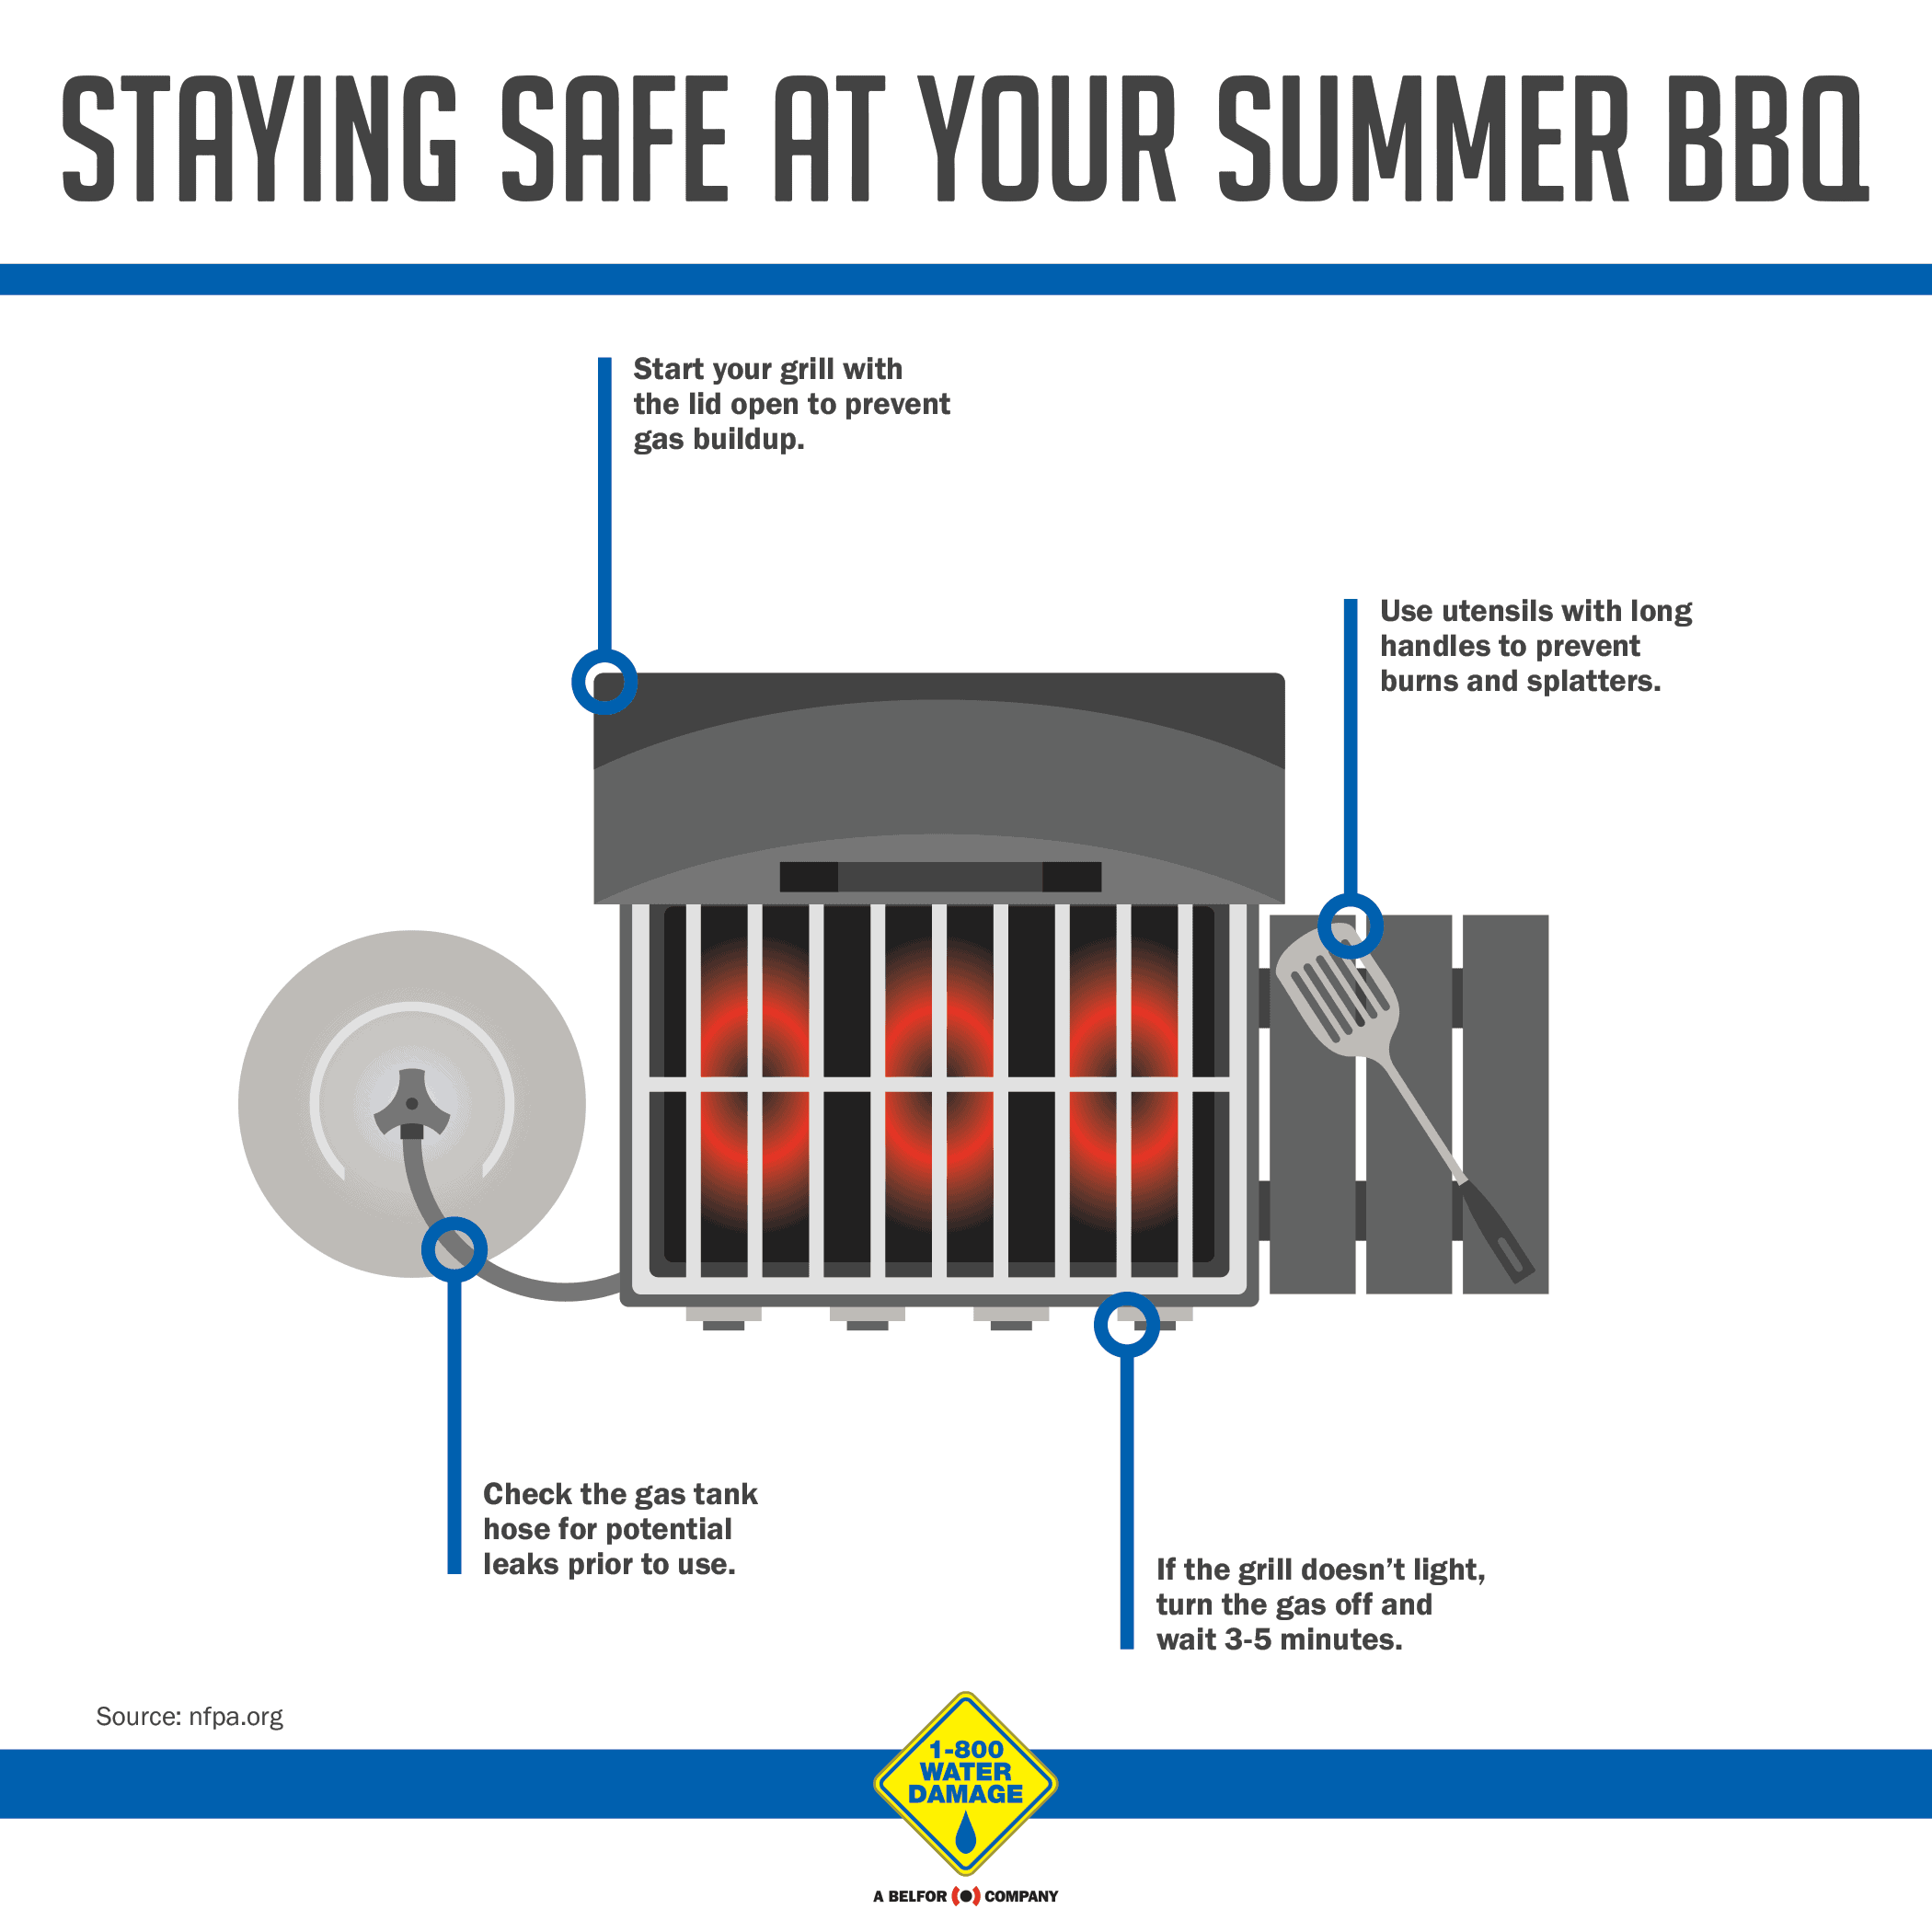 Grilling Safety Tips from 1-800 WATER DAMAGE